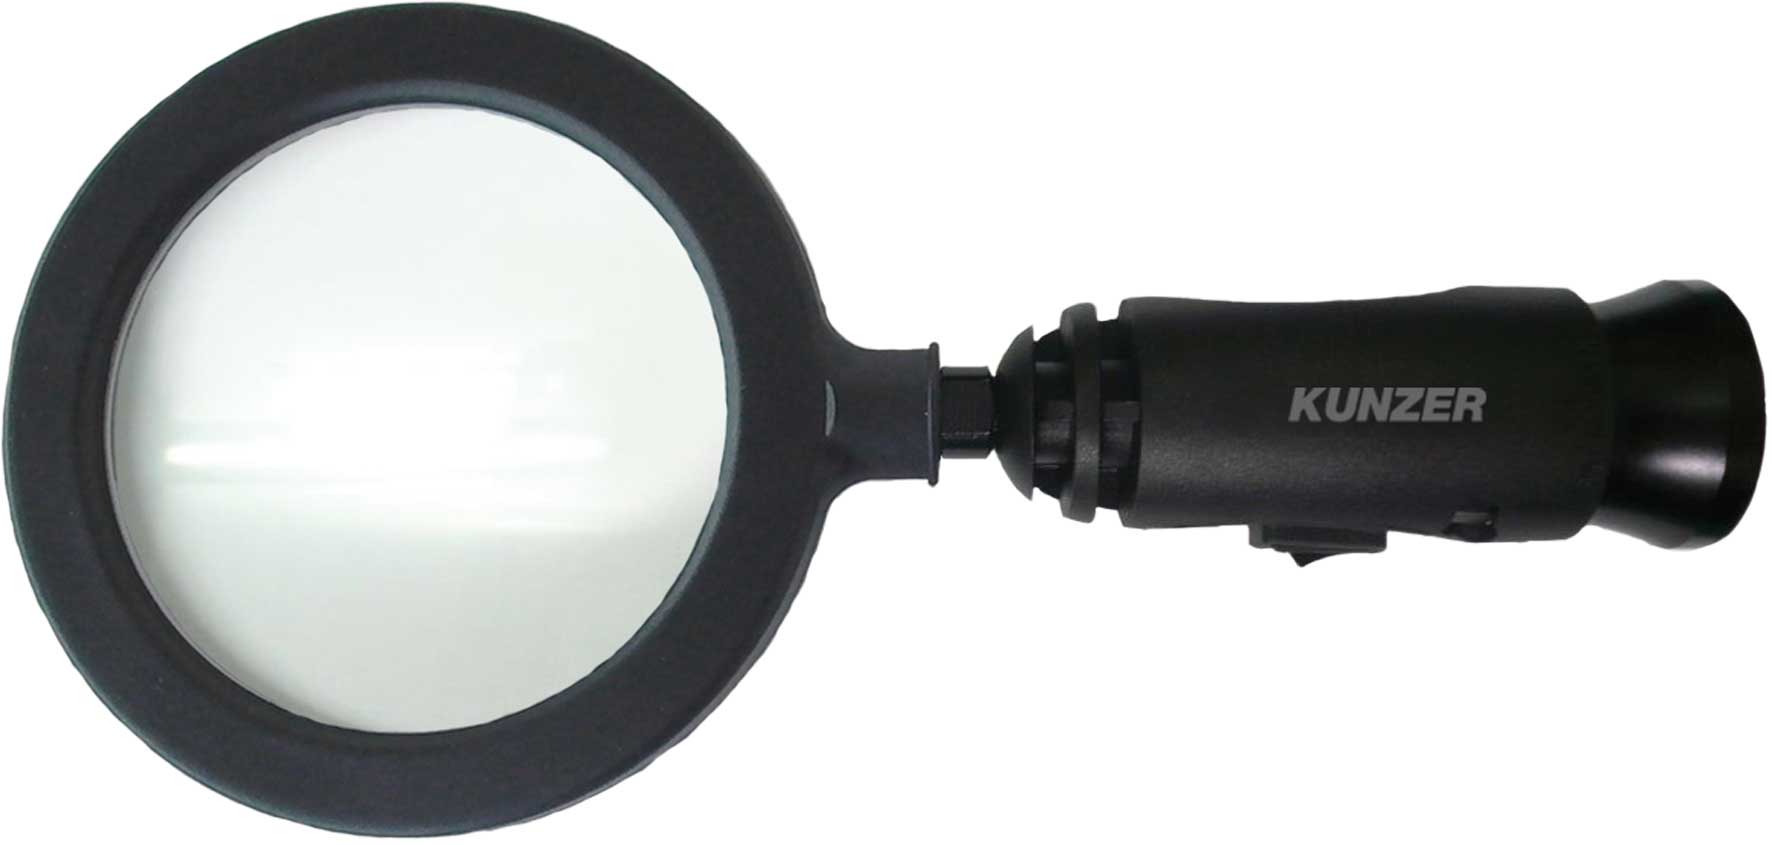 Kunzer Lupe mit LED Beleuchtung 7LL01